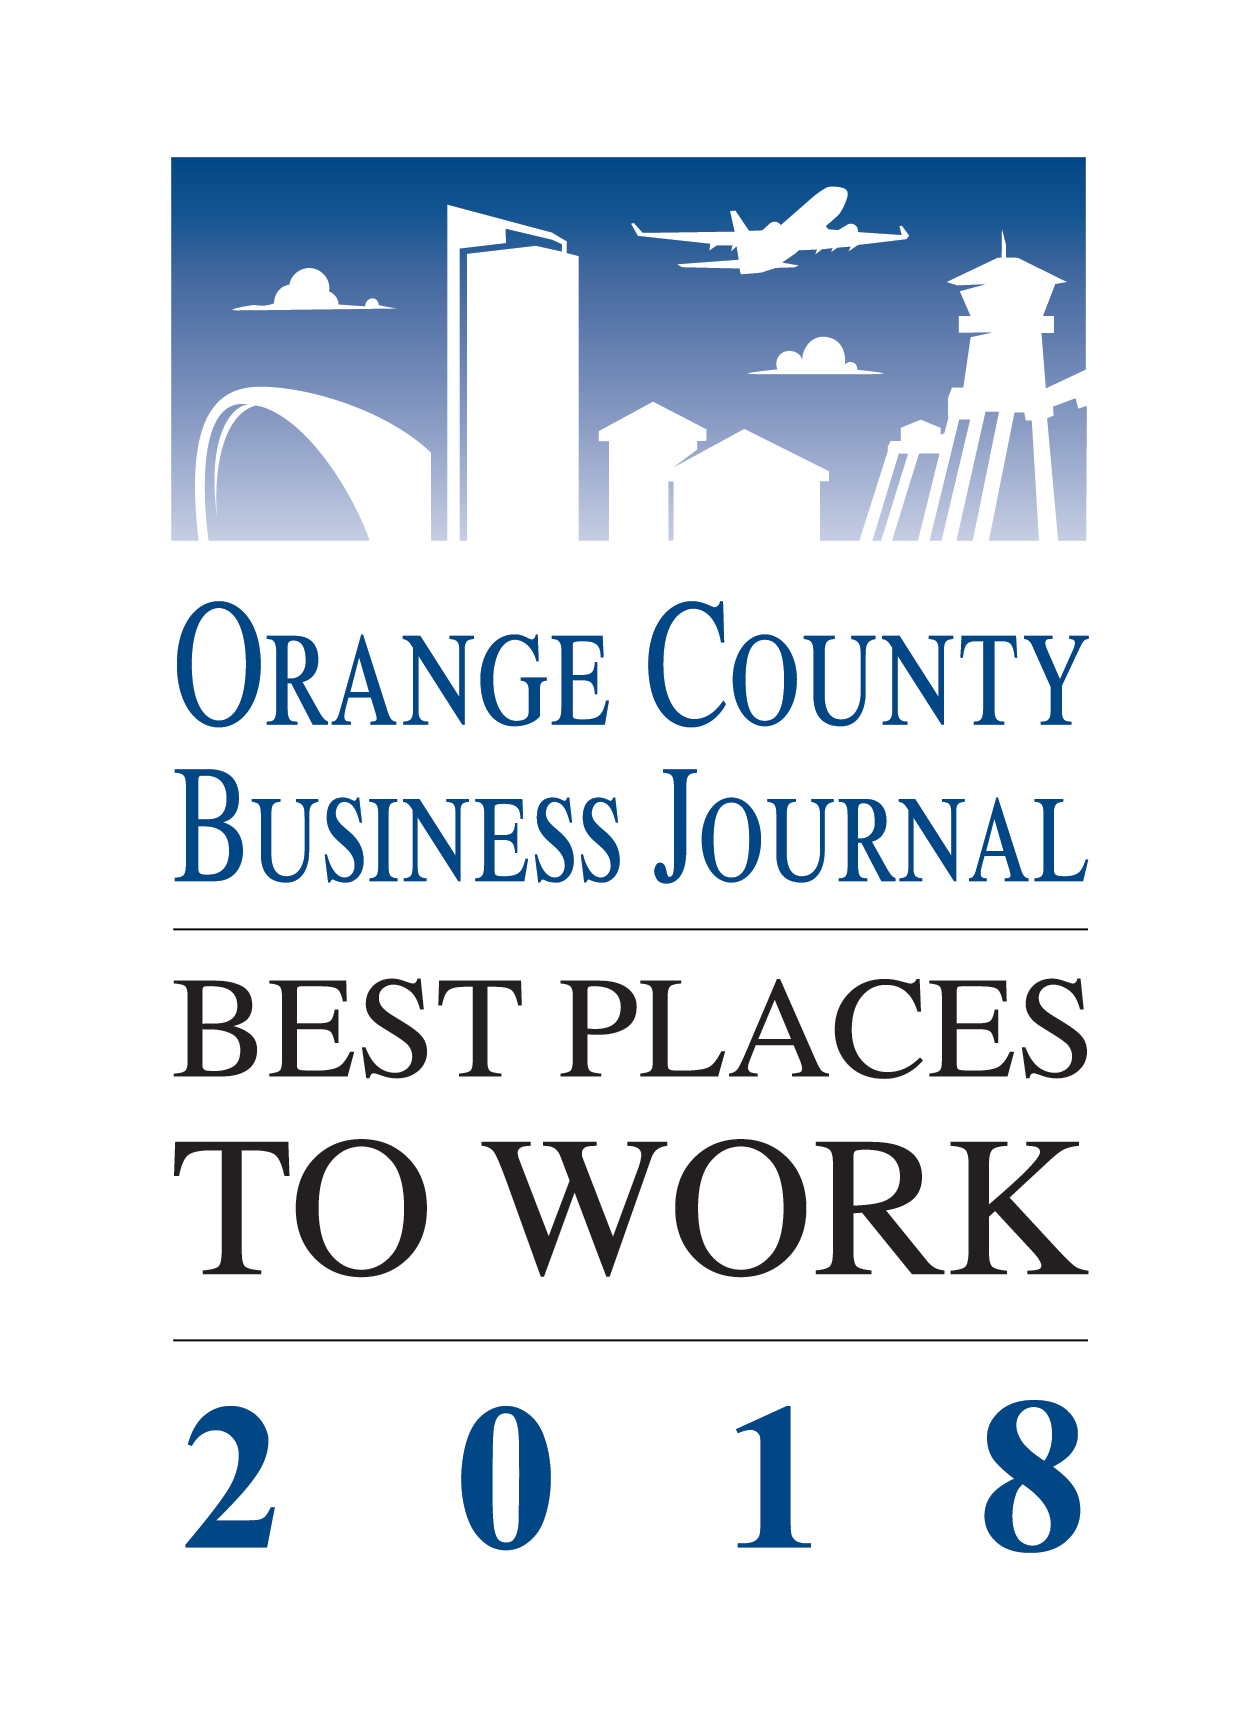 best place to work award logo 2018